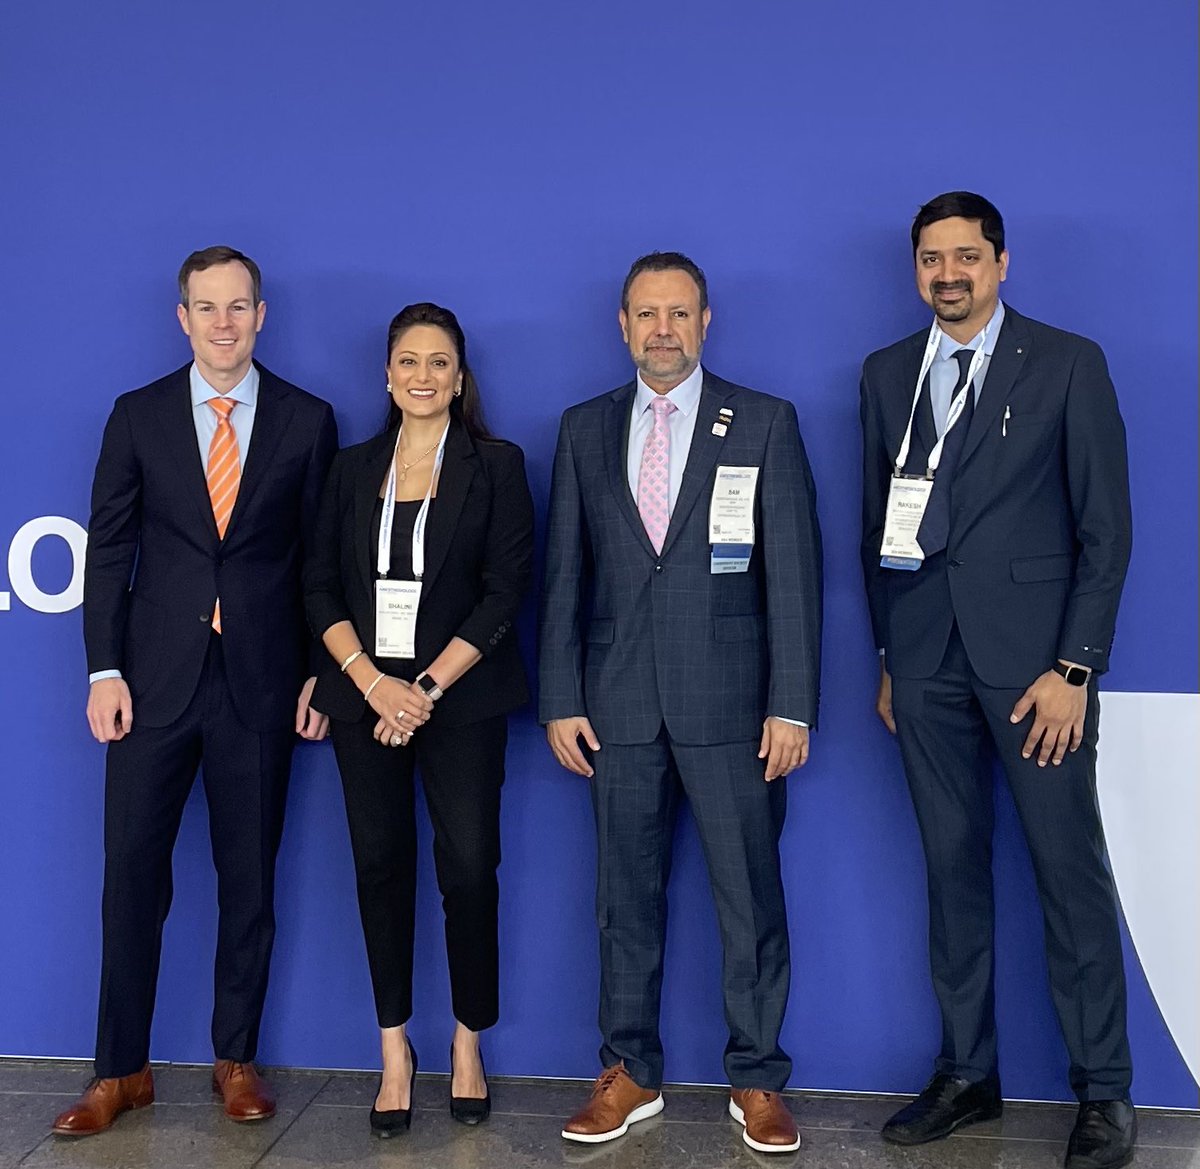 @ASRA_Society cannabis geoup. Outstanding panel with @ShaliniShahMD @NarouzeMD @rakesh6282 My biggest take-home message: ask pts about cannabis specifically preop. It can greatly affect care! @ASALifeline #anes23